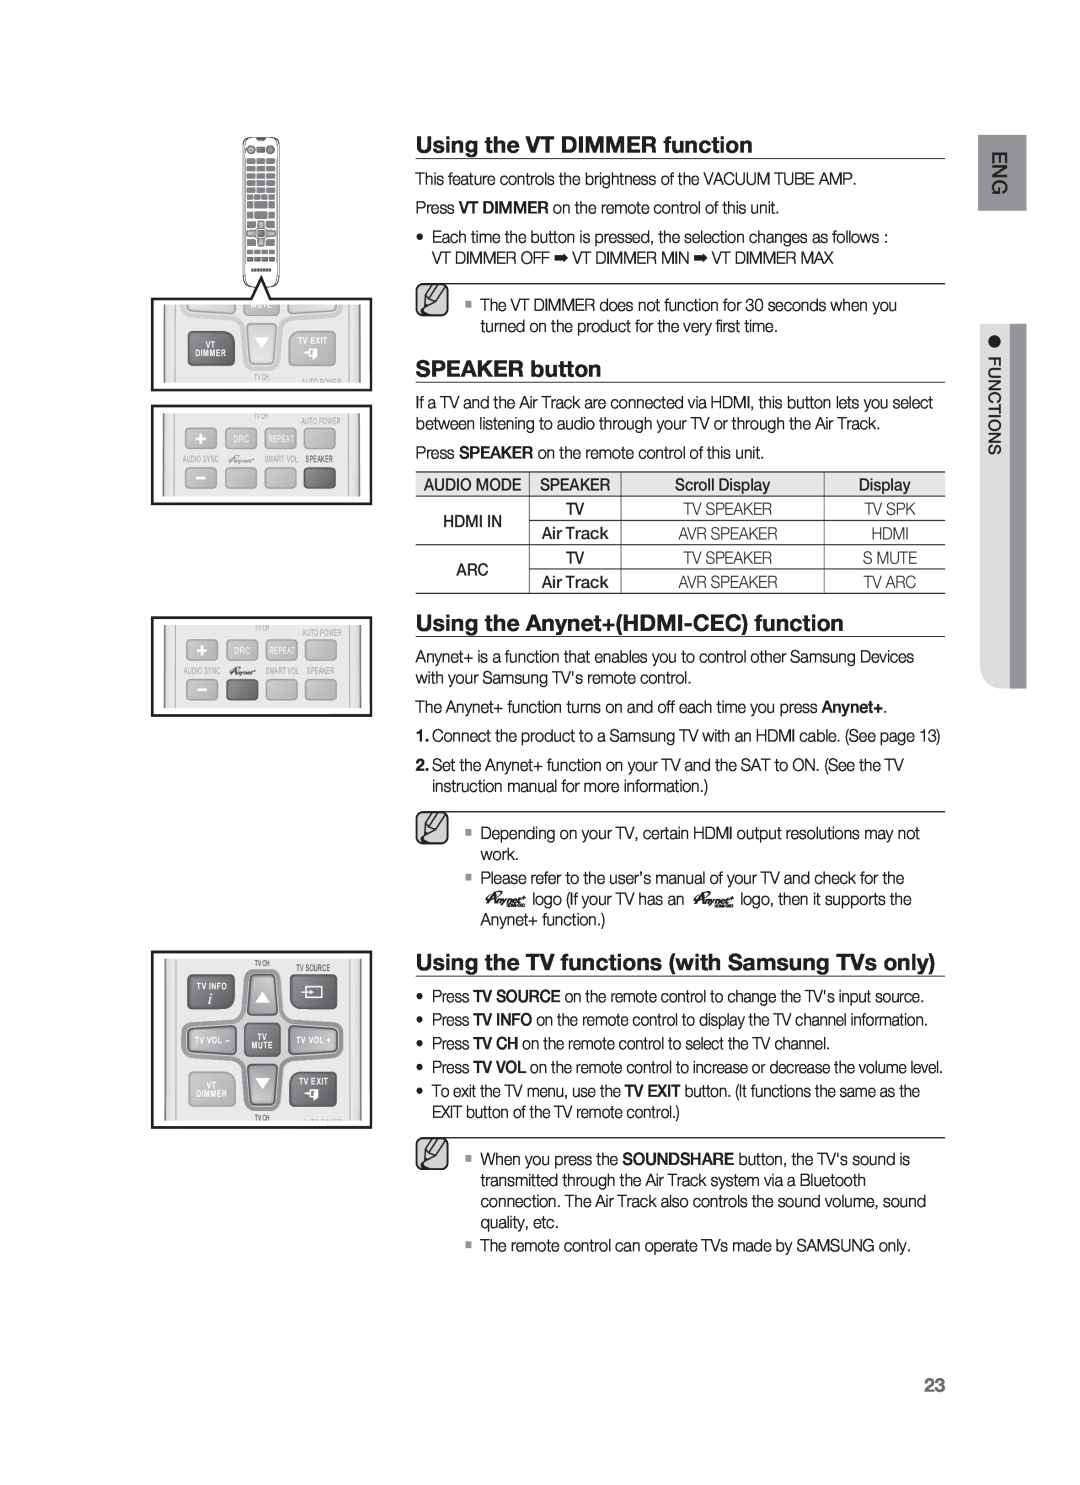 Samsung HW-F850/ZA user manual Using the VT DIMMER function, SPEAKER button, Using the Anynet+HDMI-CECfunction 